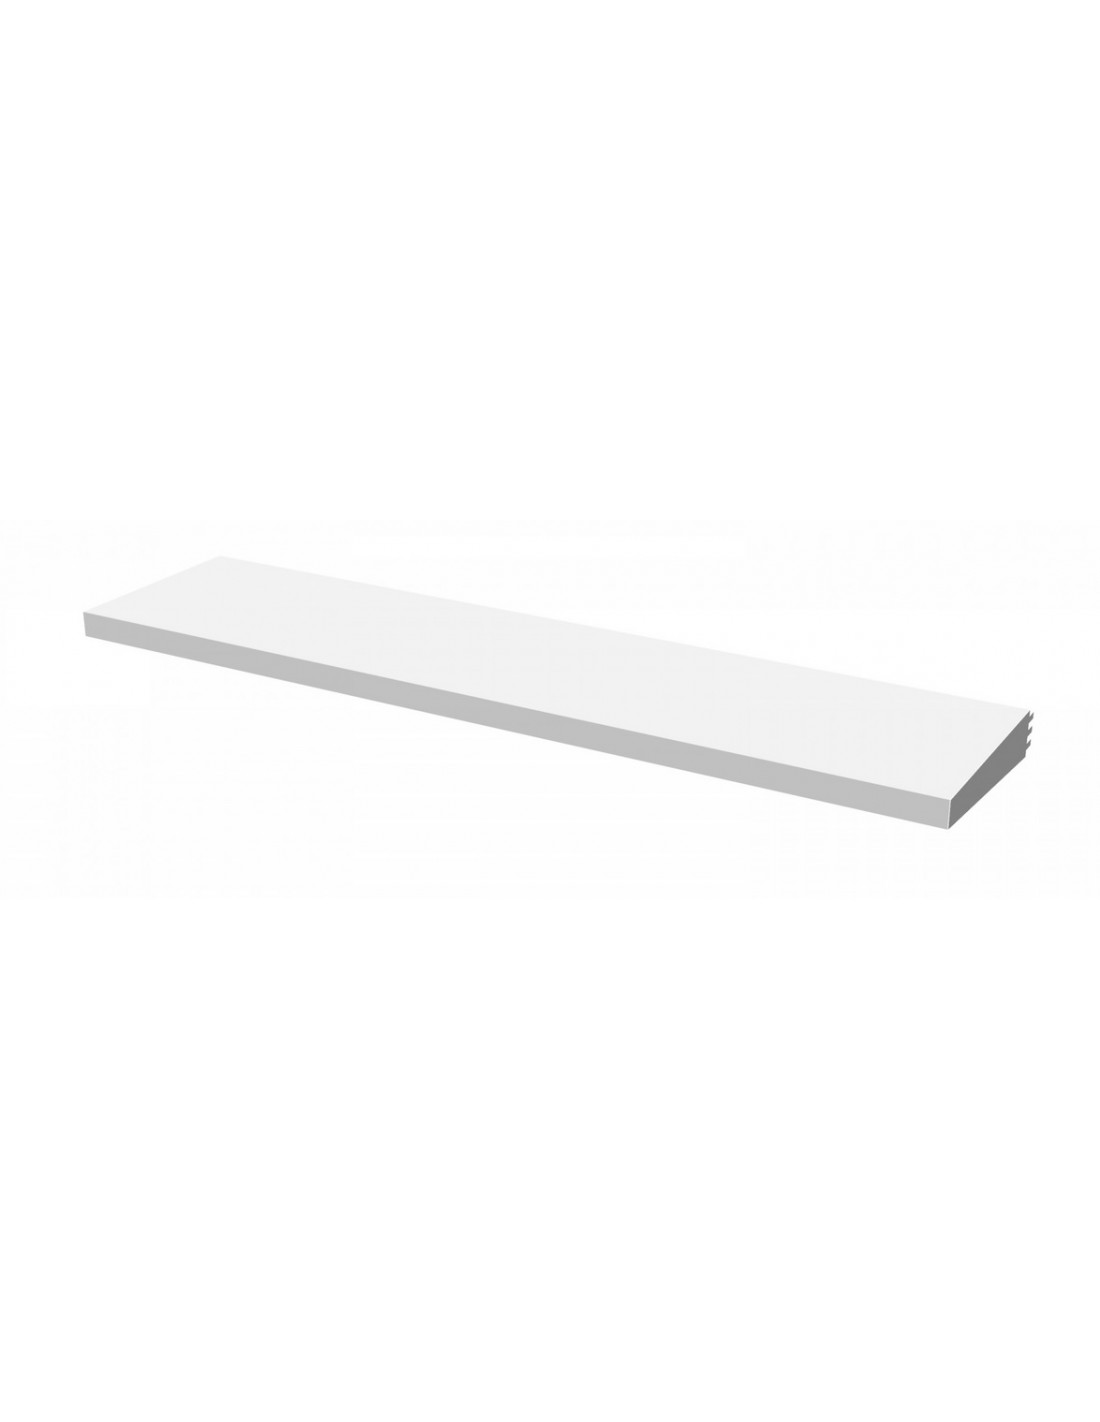 Additional shelf in 60 cm white painted sheet - For mod. VOLCANO 60